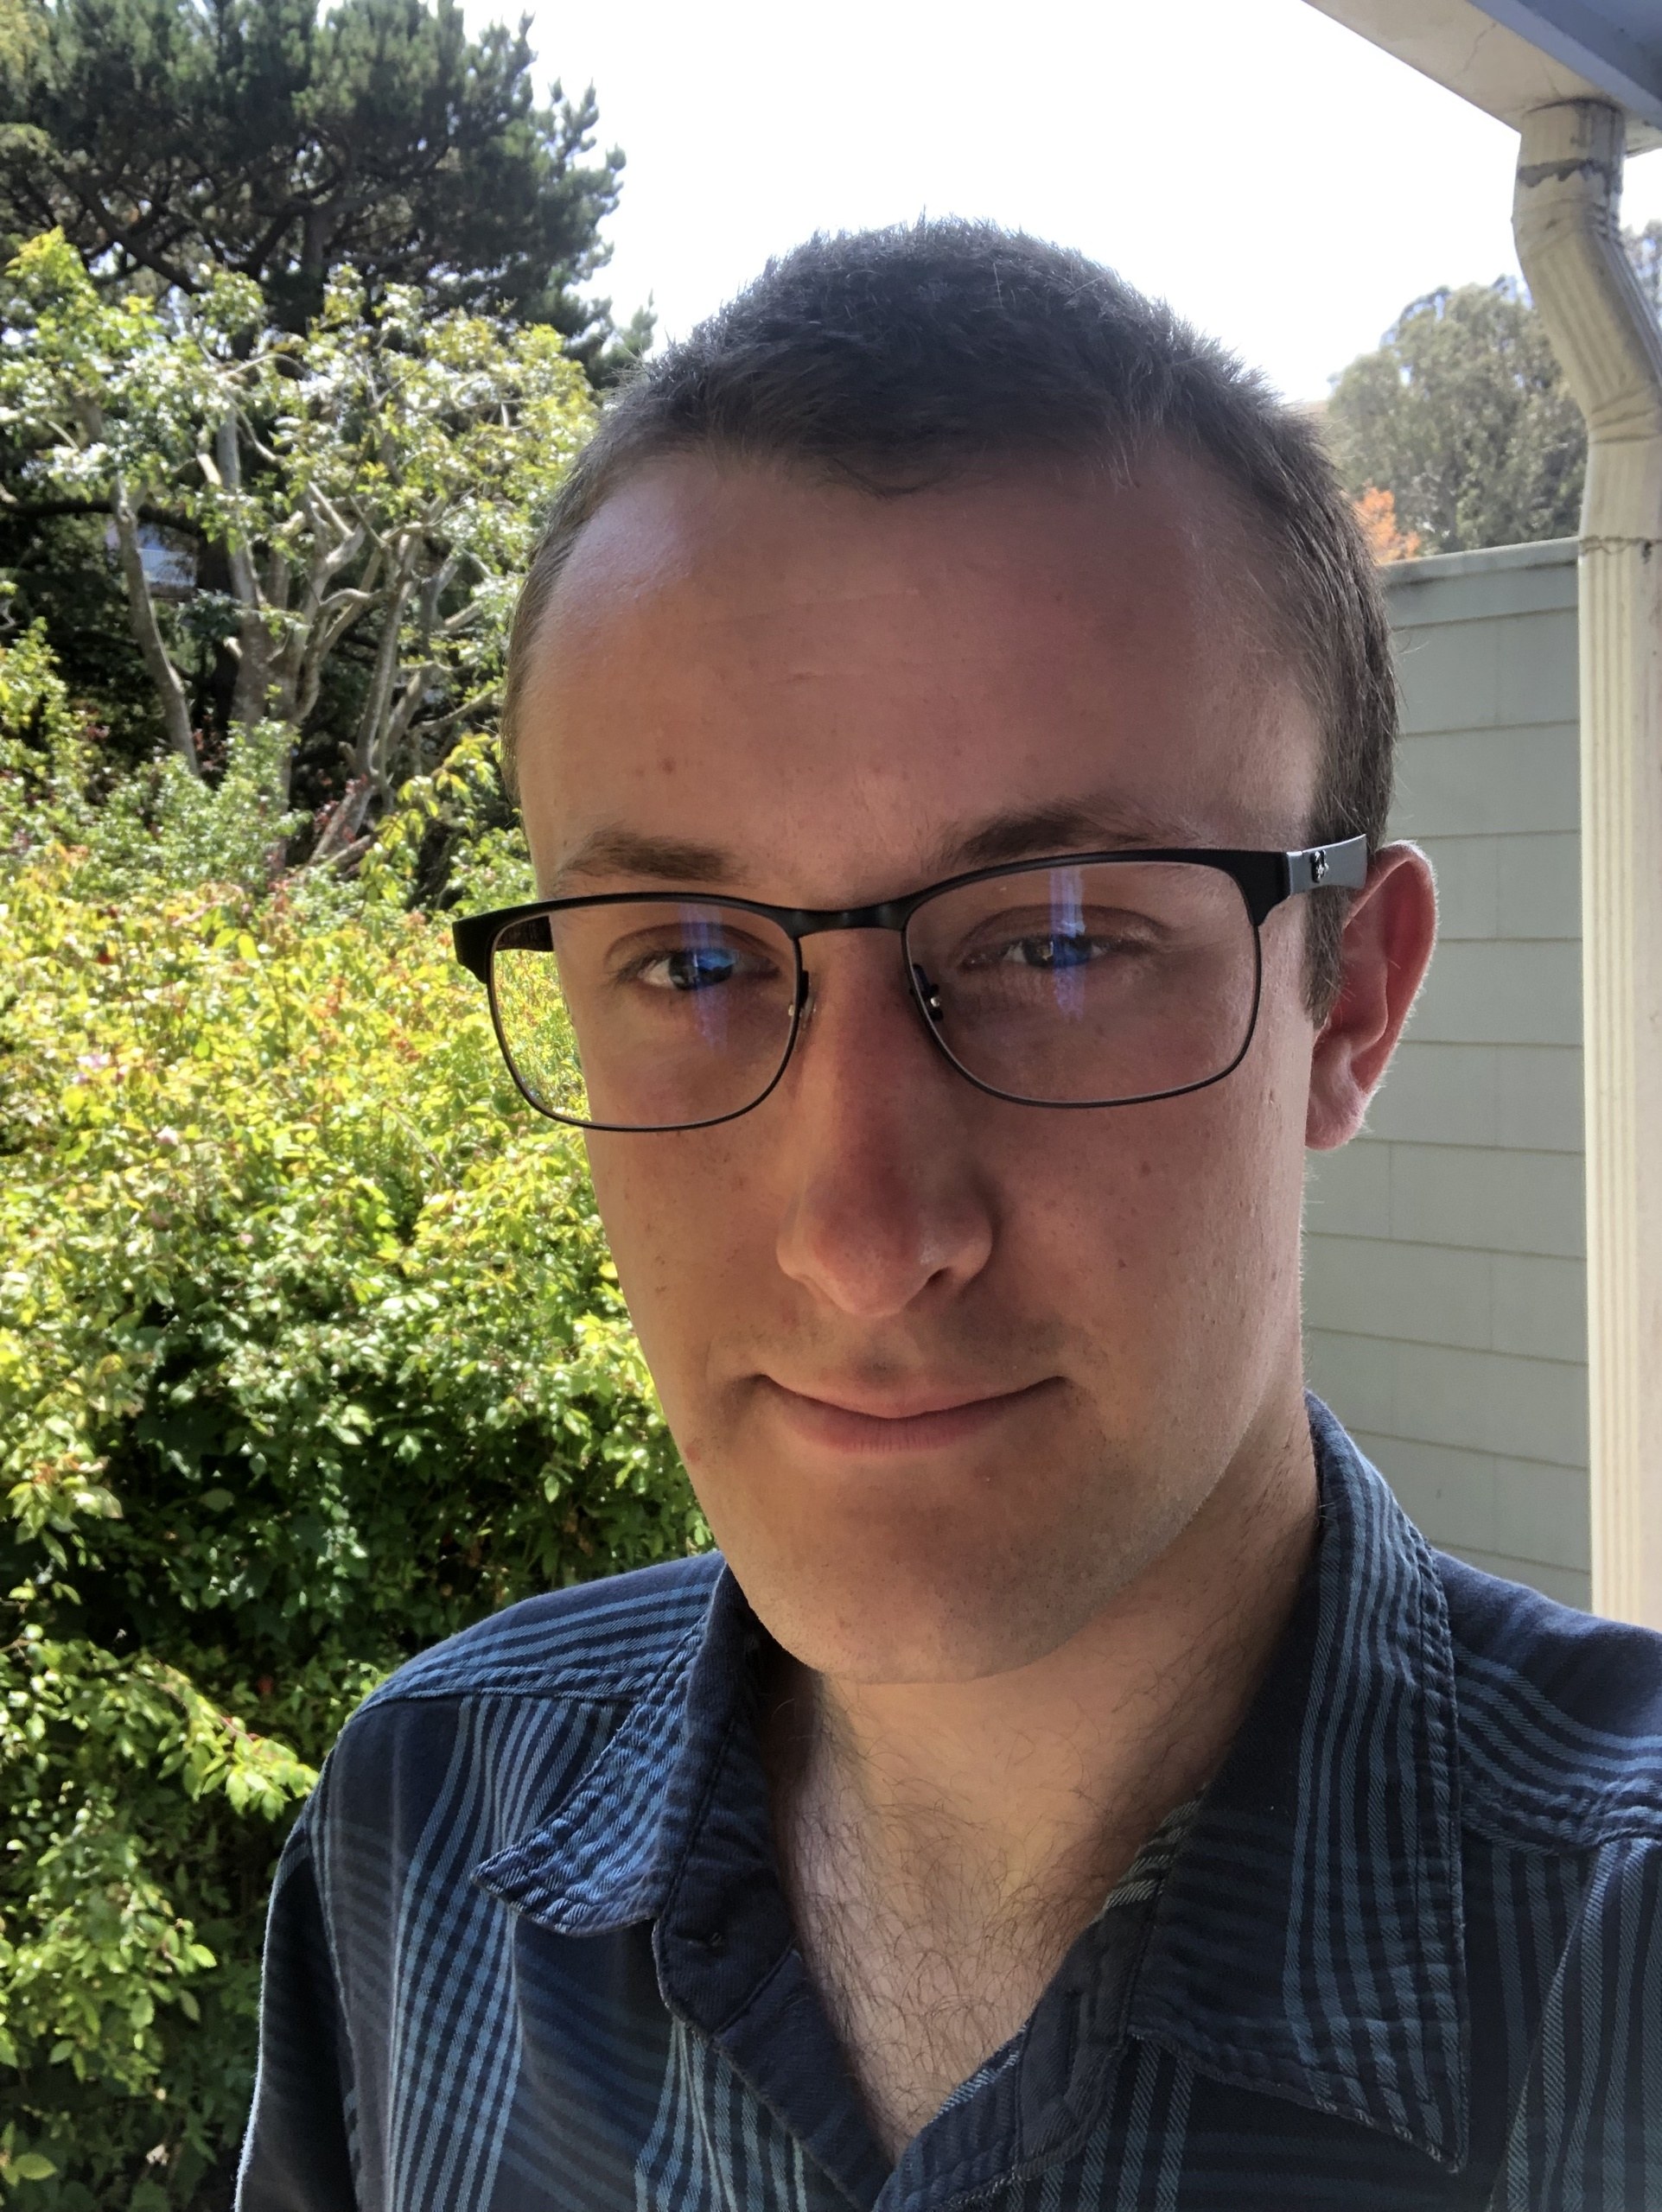 Headshot of Gabe Pine wearing glasses and a blue shirt